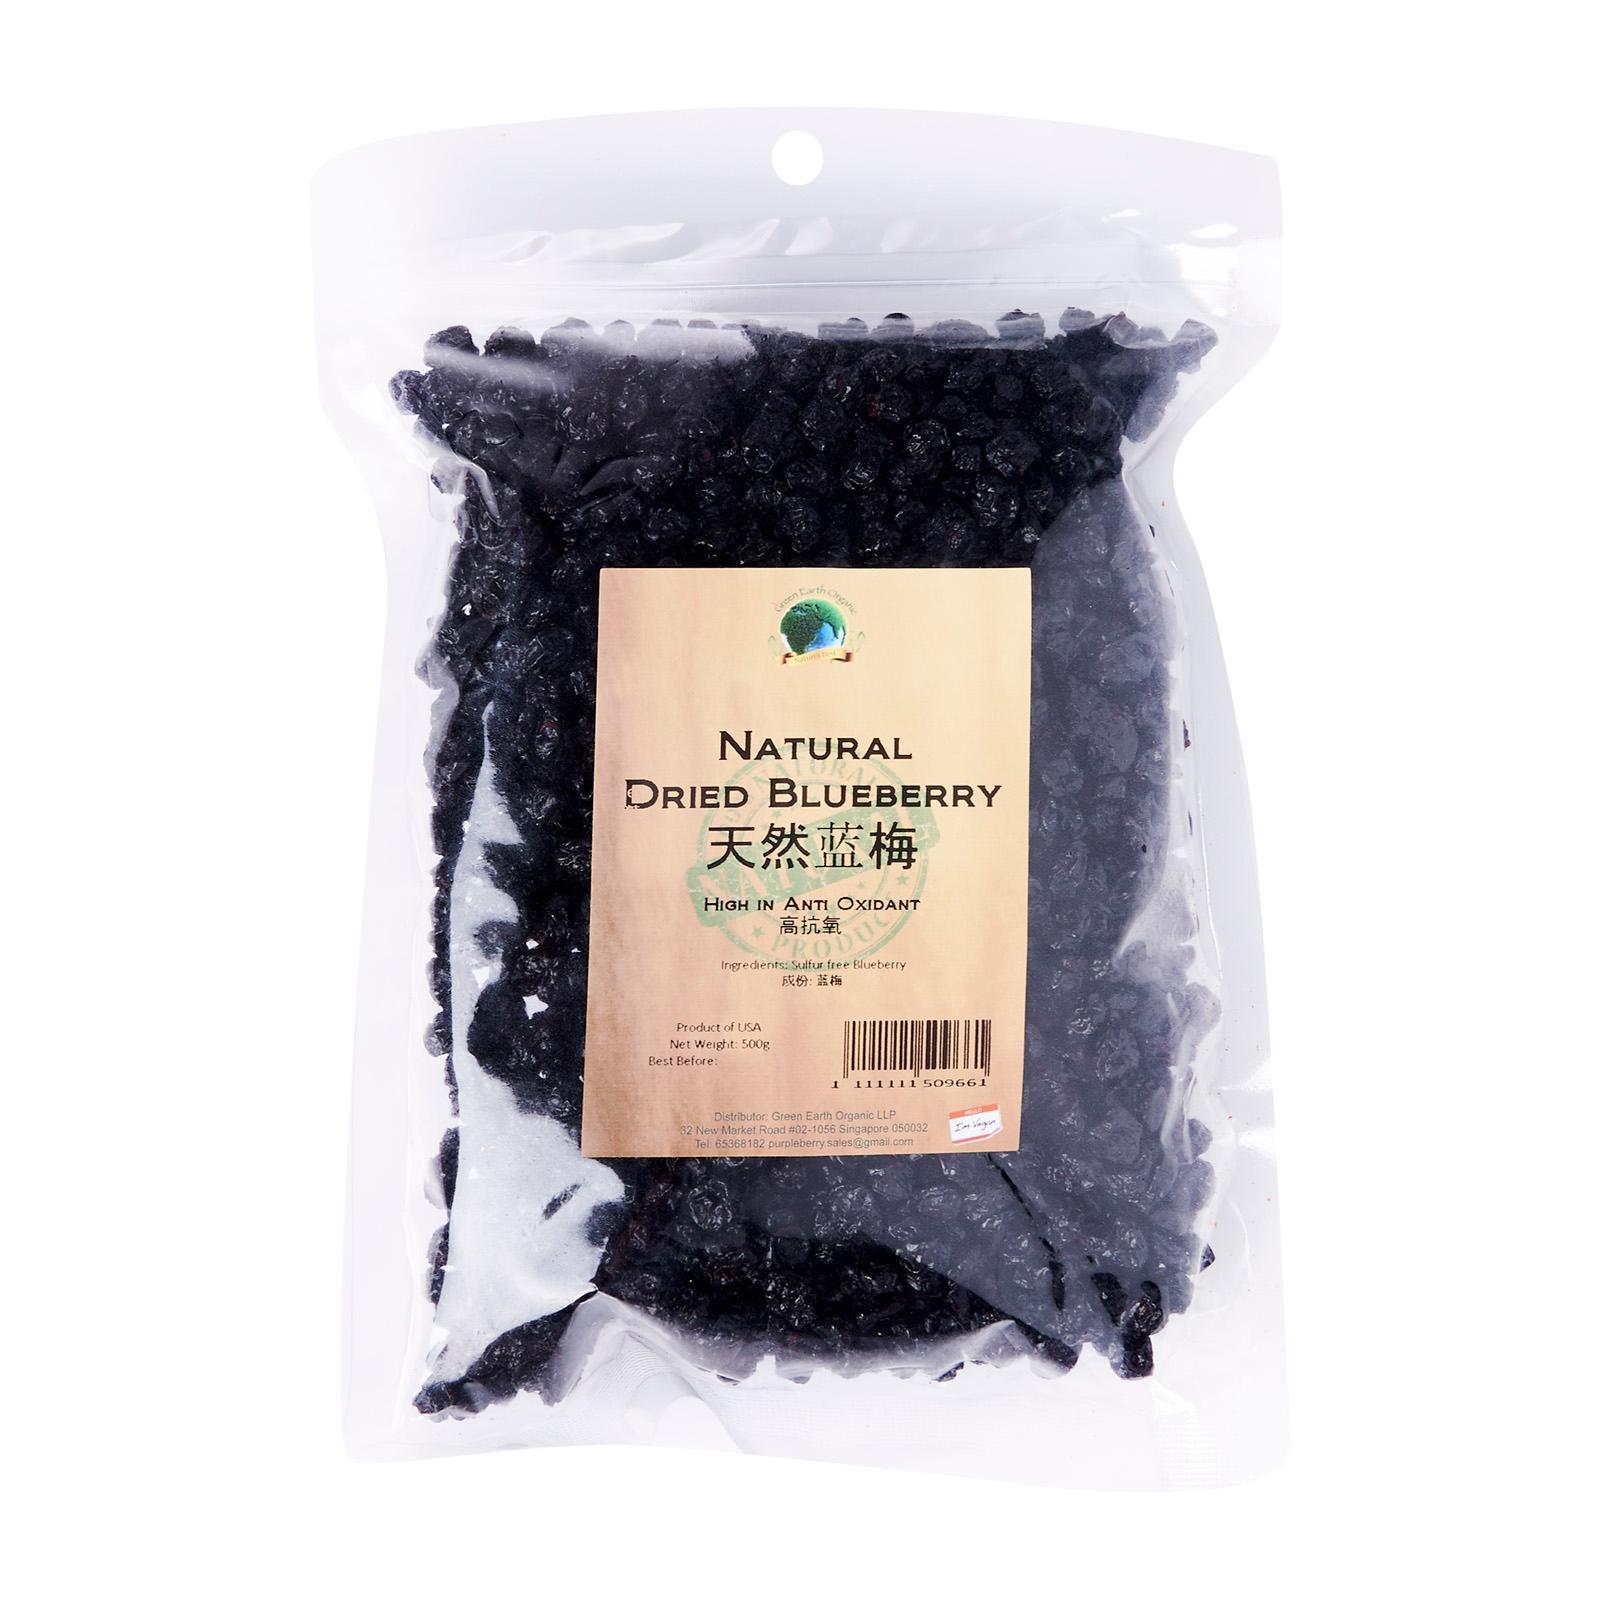 Natural Dried Blueberry